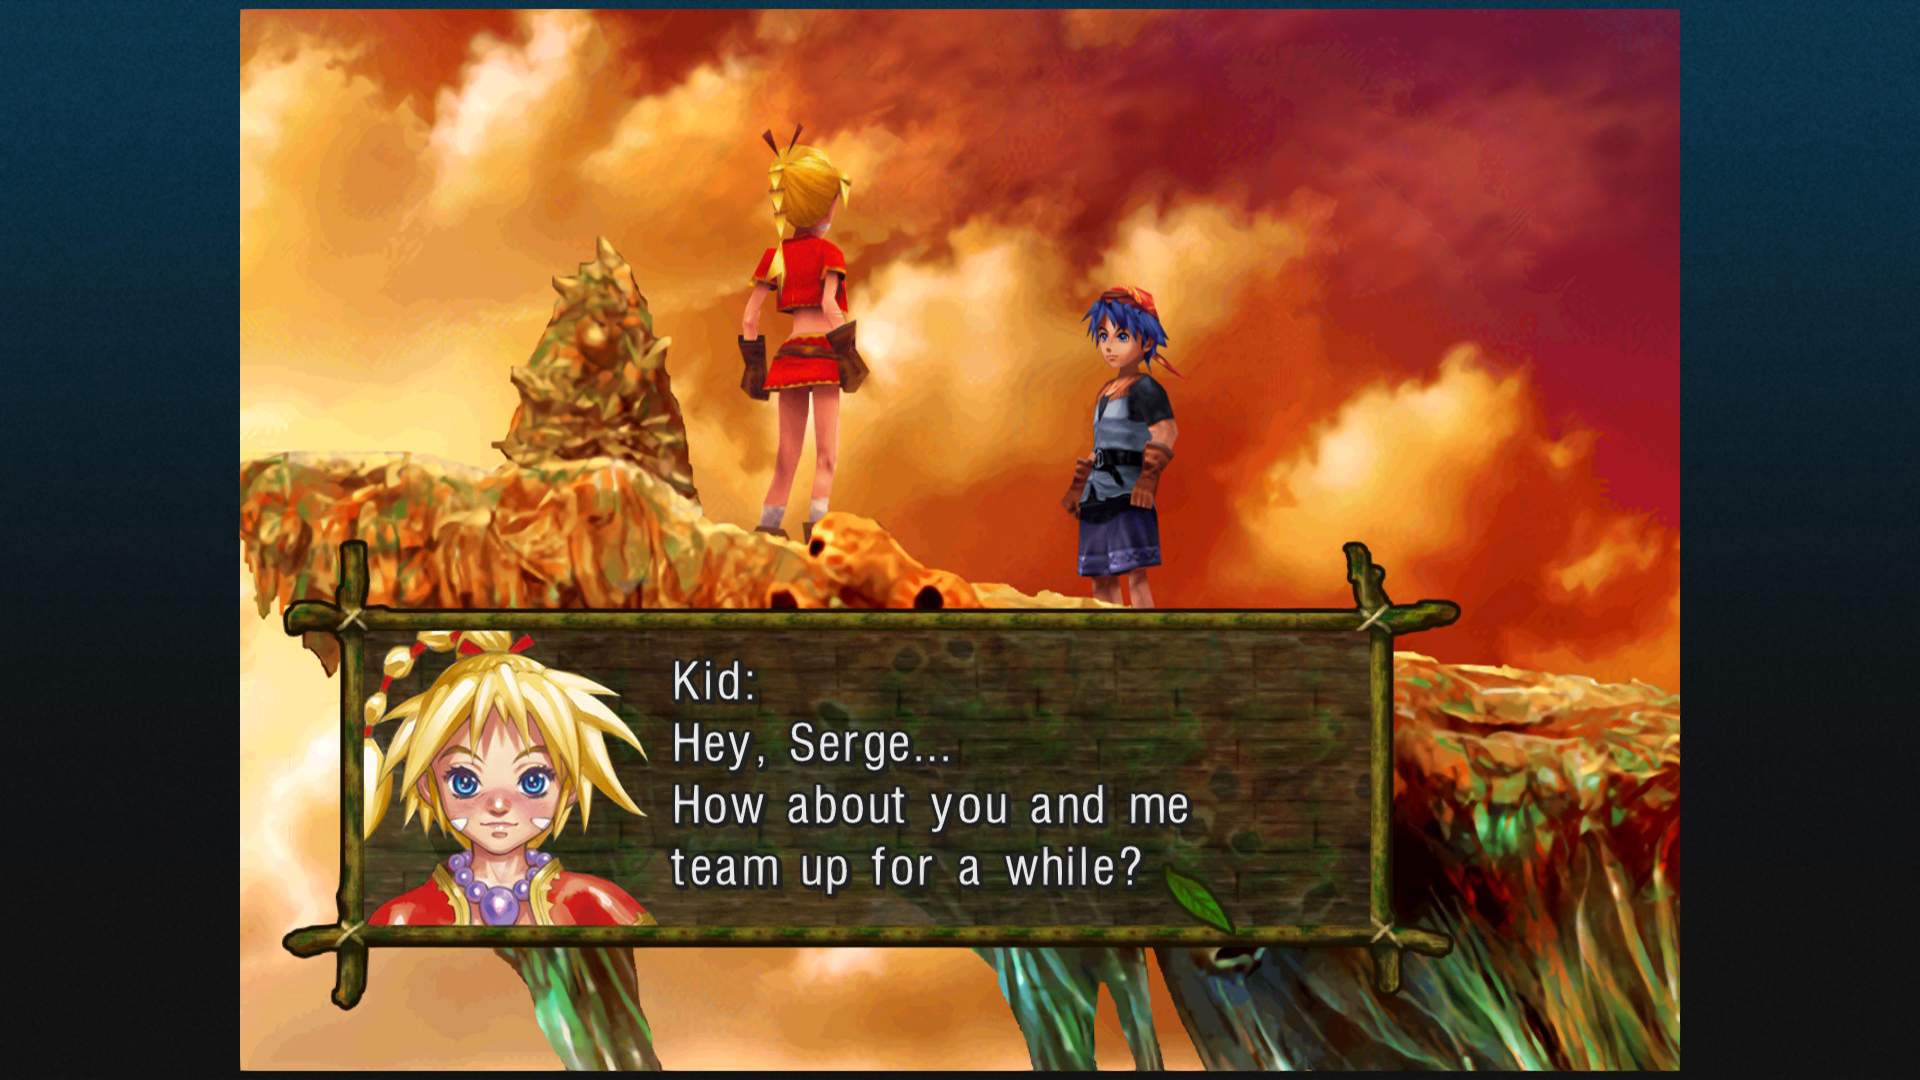 Gameplay of KID and SERGE on the edge of a cliff, with dialogue in a text box